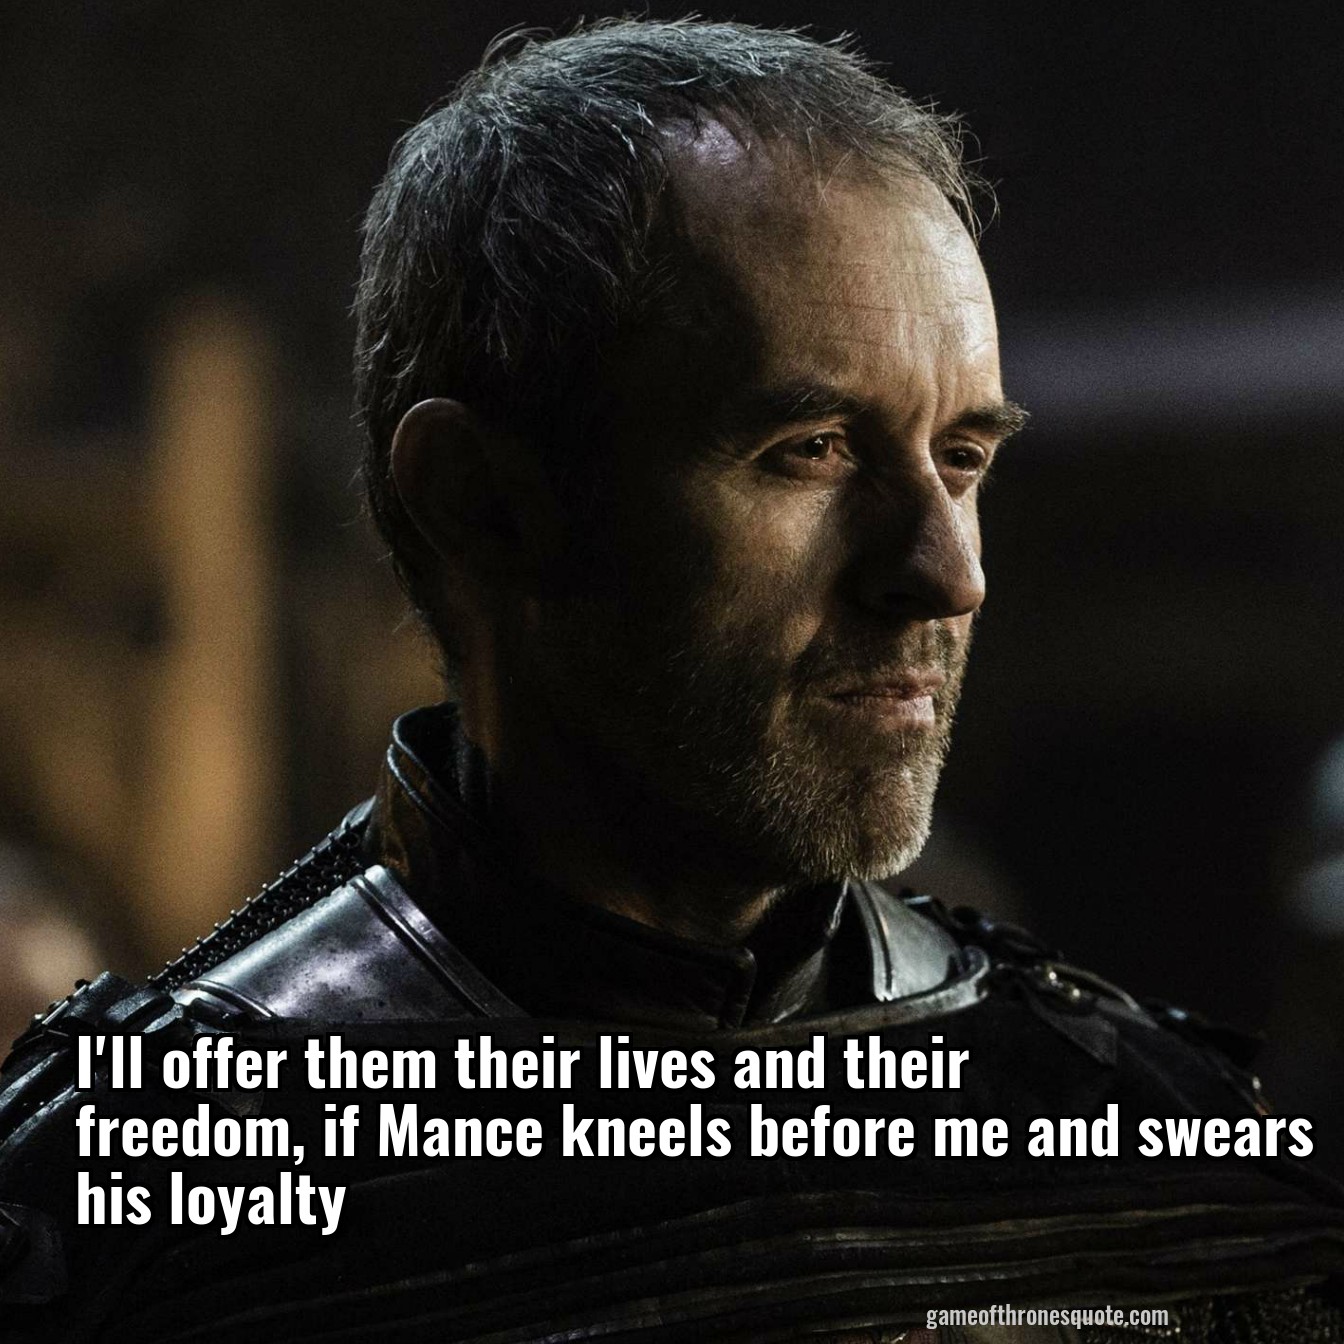 I'll offer them their lives and their freedom, if Mance kneels before me and swears his loyalty